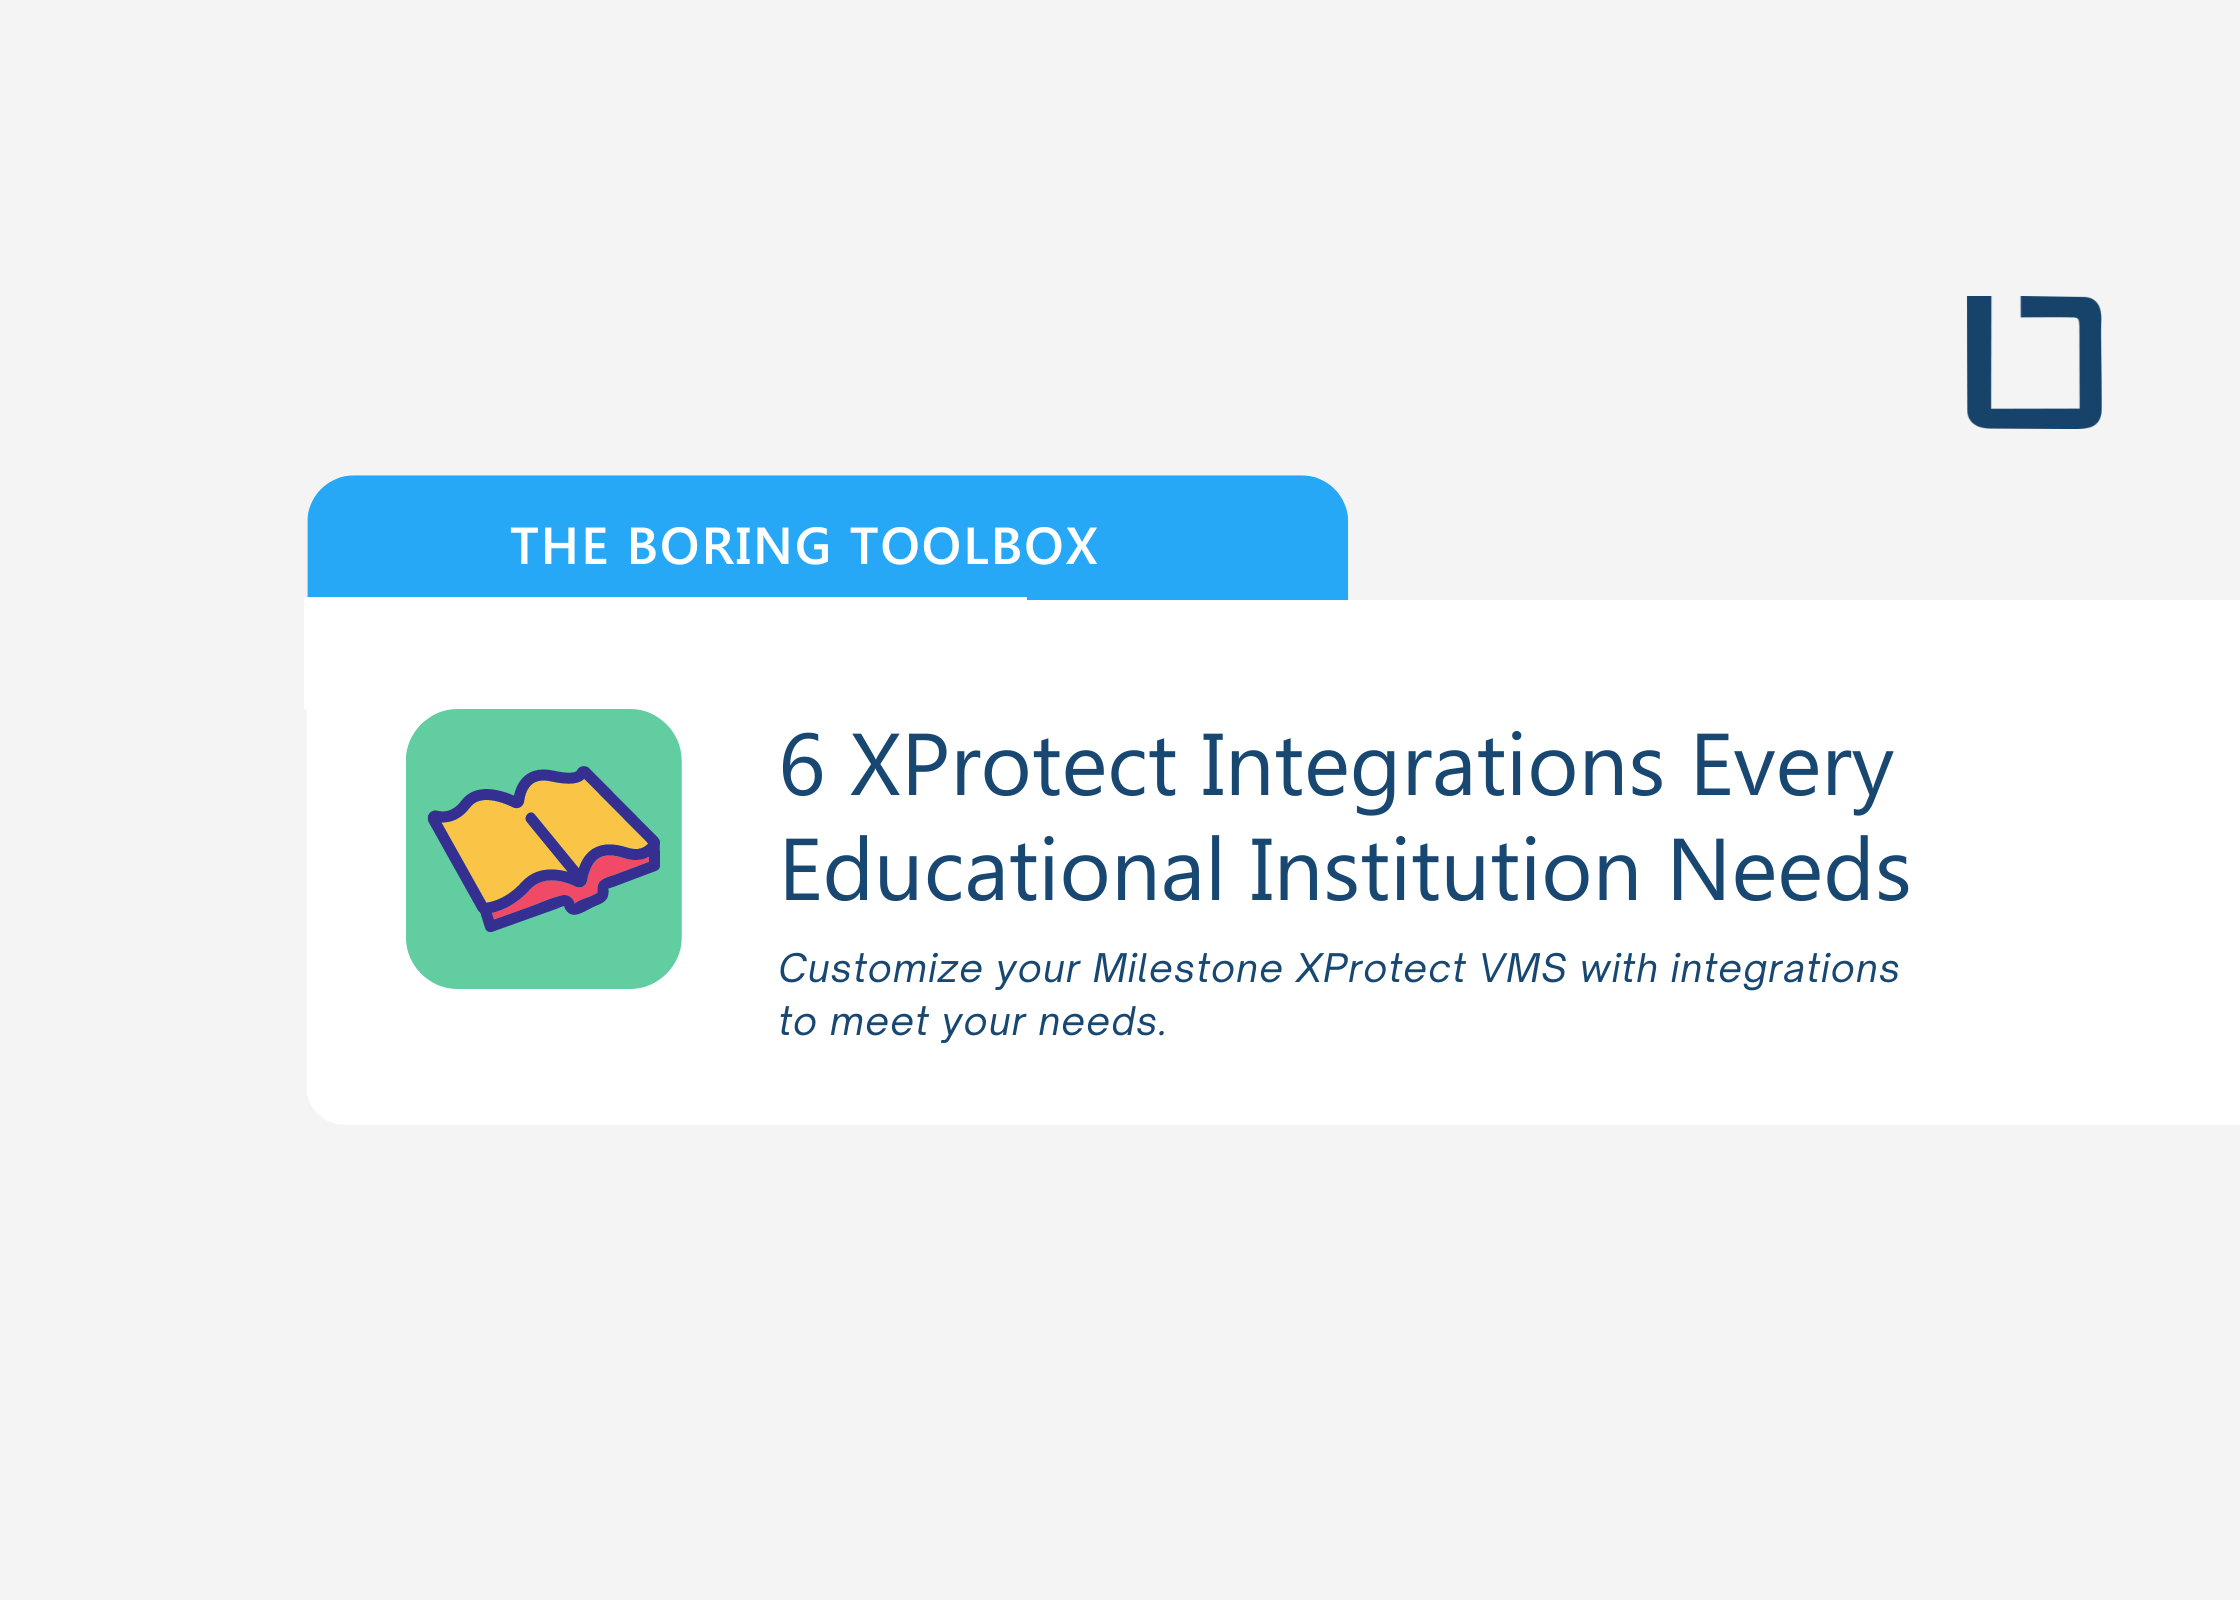 This blog will address six challenges that are especially pertinent in an educational environment and help you understand how you can customize your Milestone XProtect VMS with integrations to meet those needs.